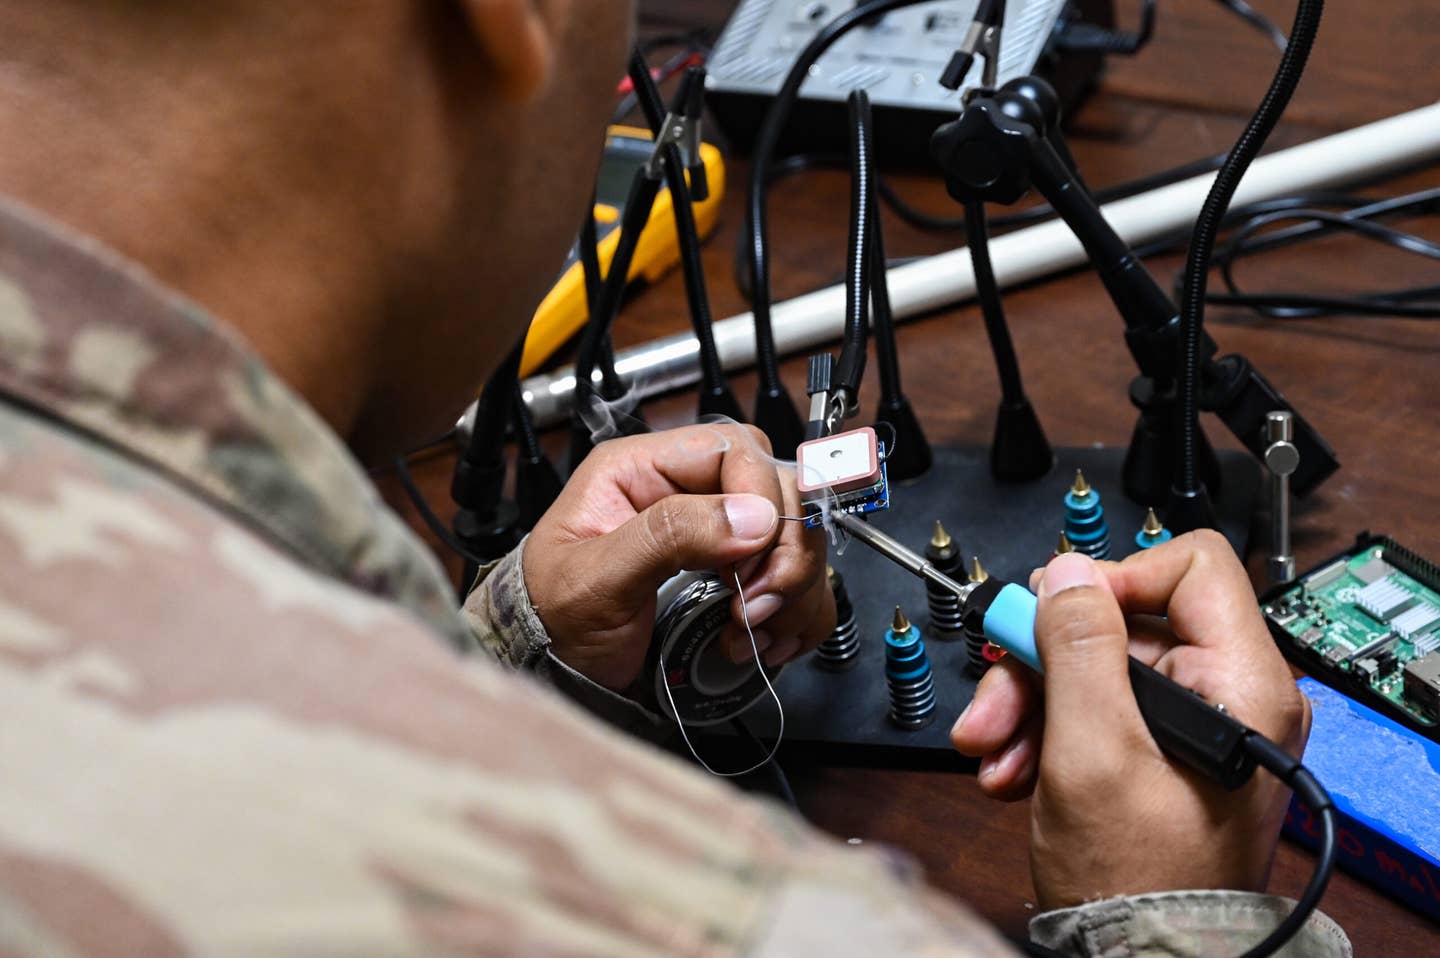 An Airman assigned to Task Force 99 solders components at Al Udeid Air Base, Qatar, October 28, 2022. <em>Credit: U.S. Air Force photo by Staff Sgt. Cassandra Johnson</em>